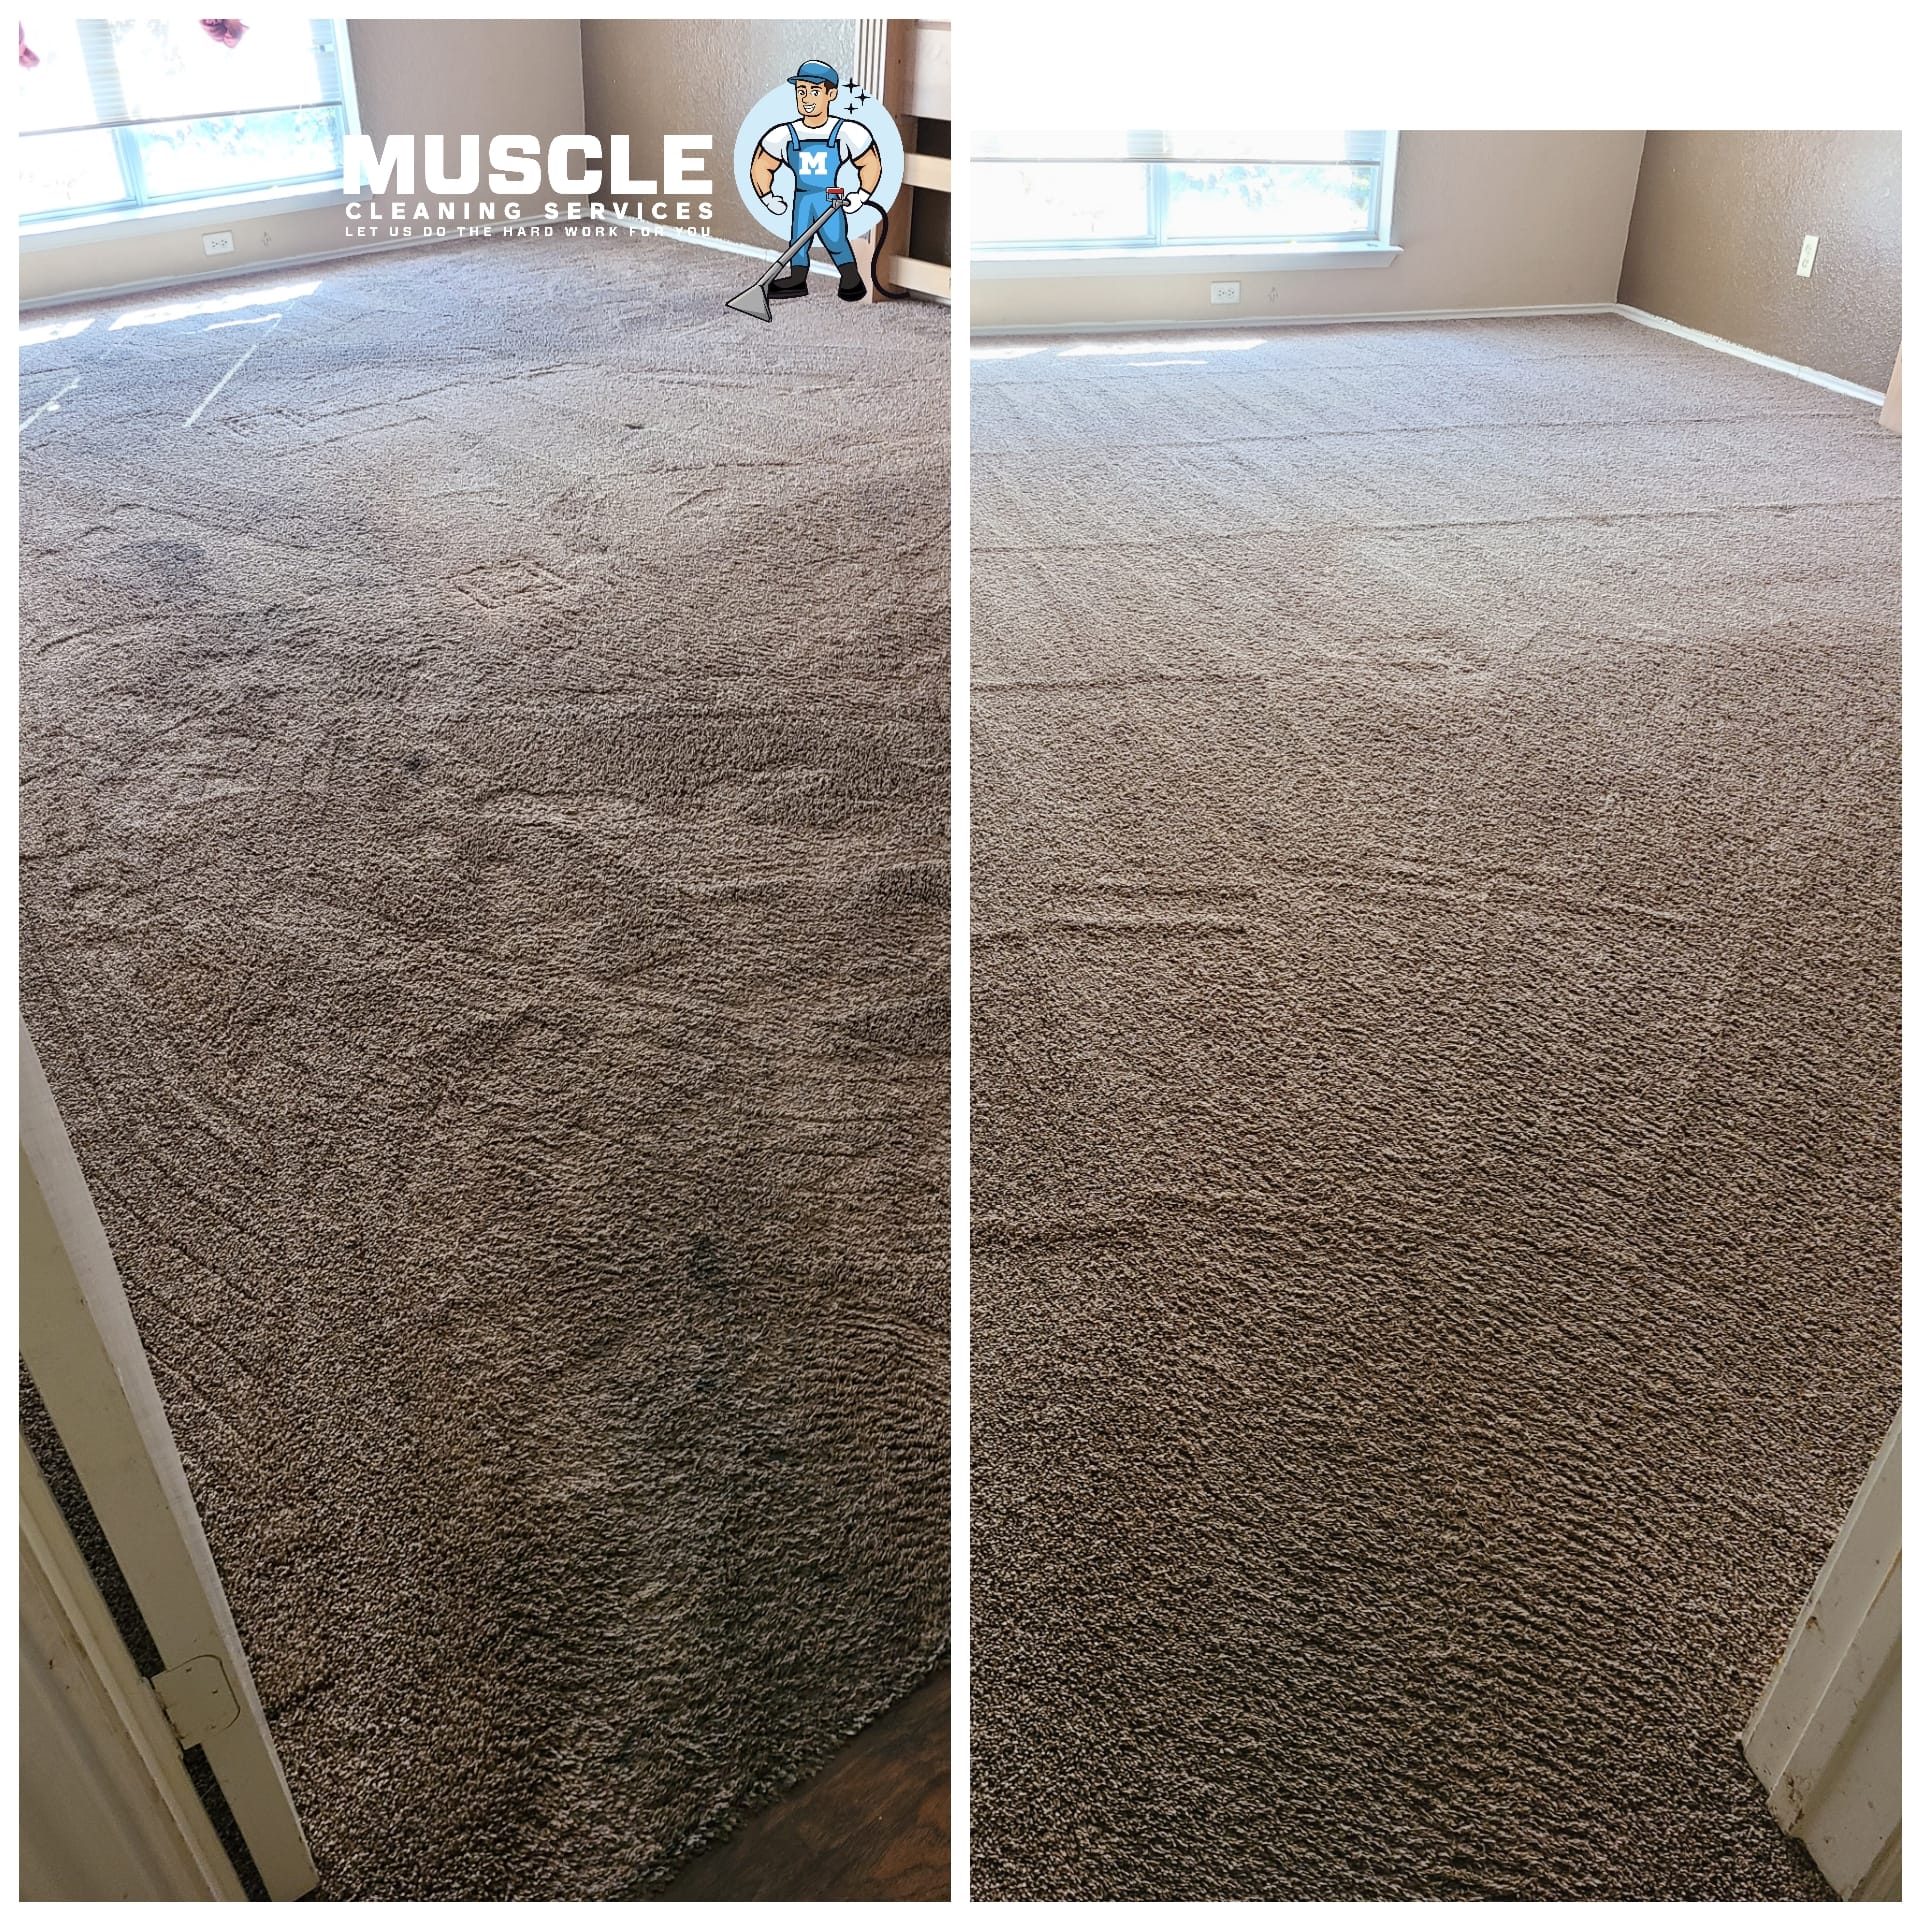 Muscle Cleaning Services - Hire Cleaners for Carpet